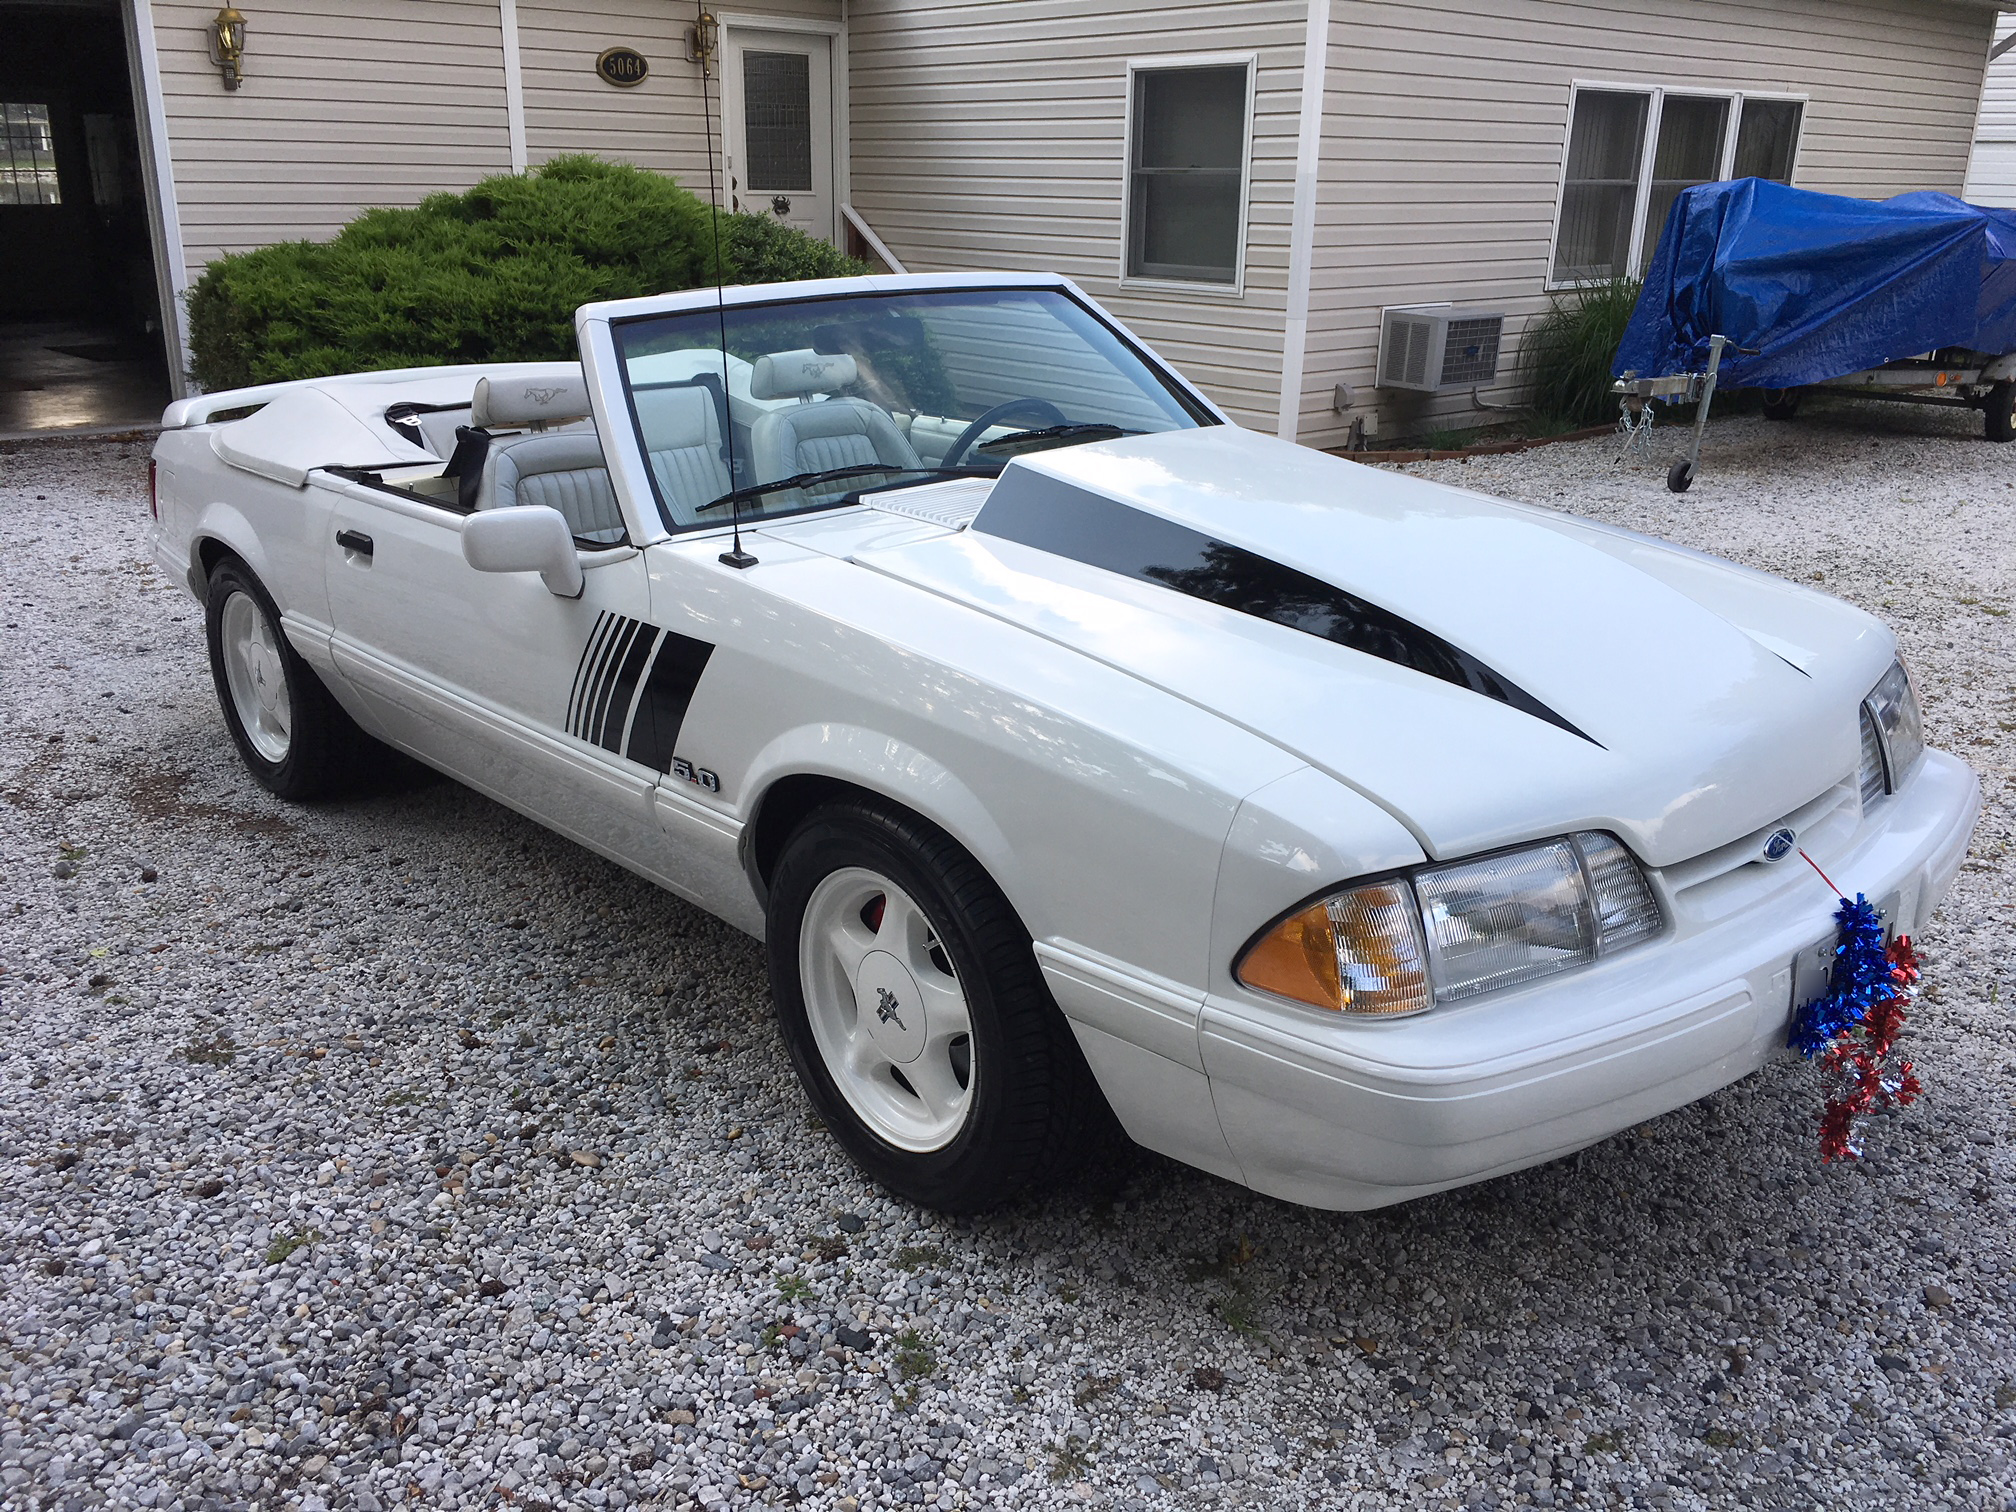 For sale: 1993 Ford Mustang Triple White Feature Car/Automatic/93k miles